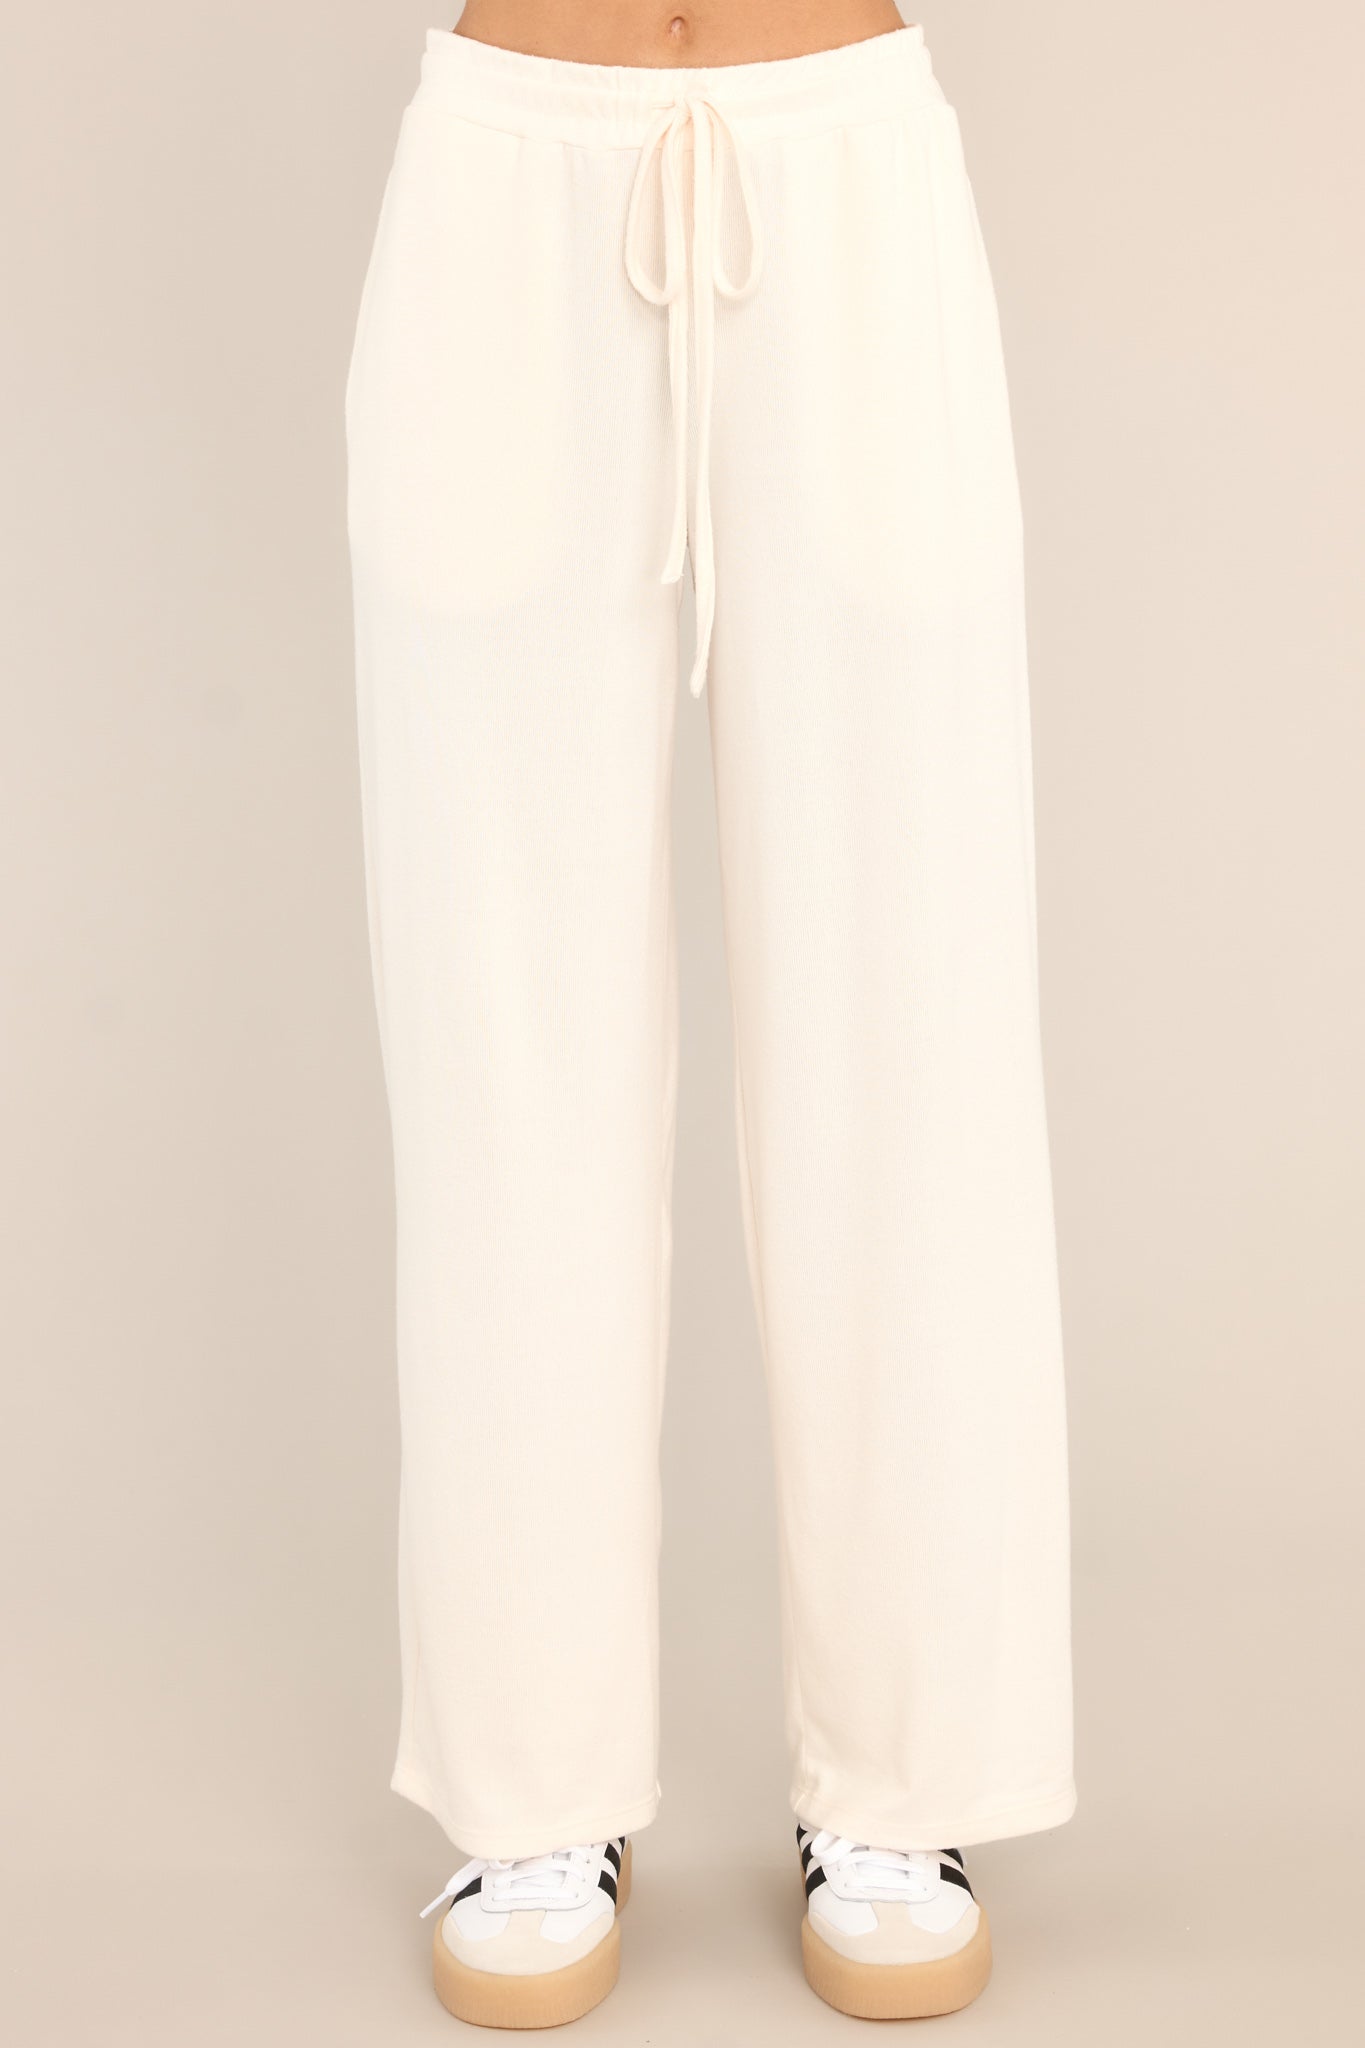 Front view of these lounge pants that feature an elastic waistband with a self-tie drawstring, pockets, and a wide leg.